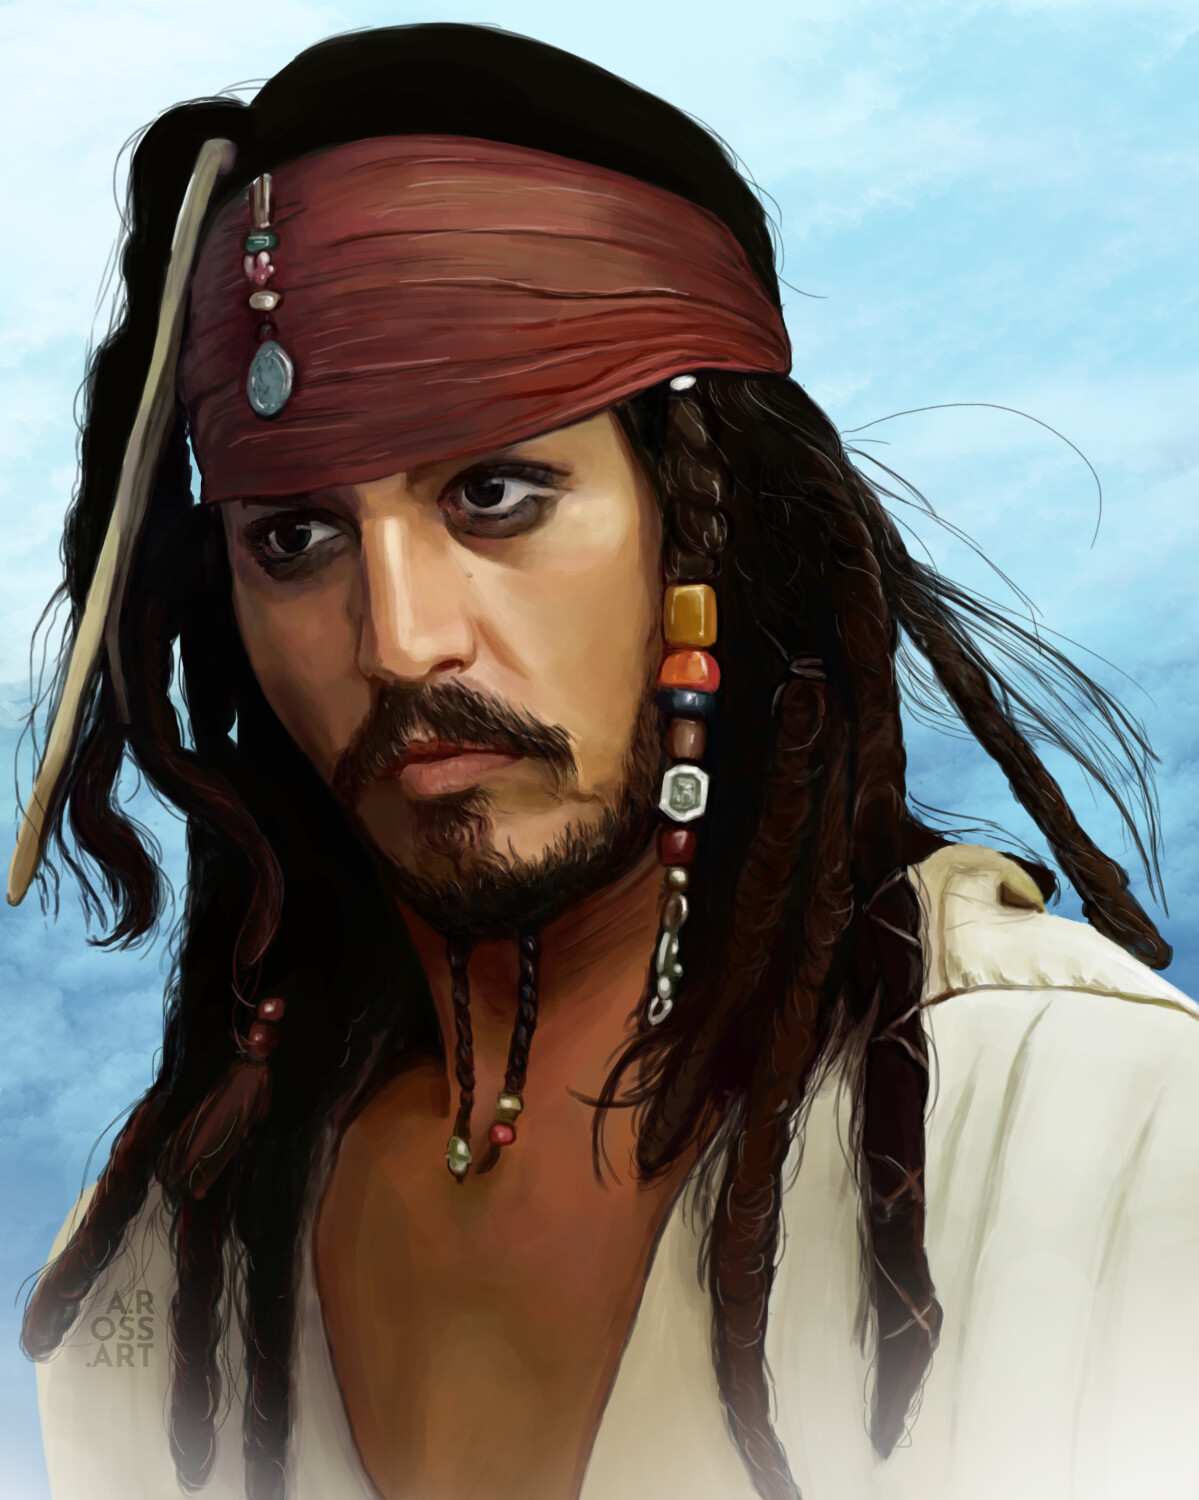 Wallpaper : portrait, movies, Person, Jack Sparrow, Pirates of the  Caribbean On Stranger Tides, hairstyle, screenshot, 2560x1600 px, album  cover, facial hair 2560x1600 - - 631975 - HD Wallpapers - WallHere